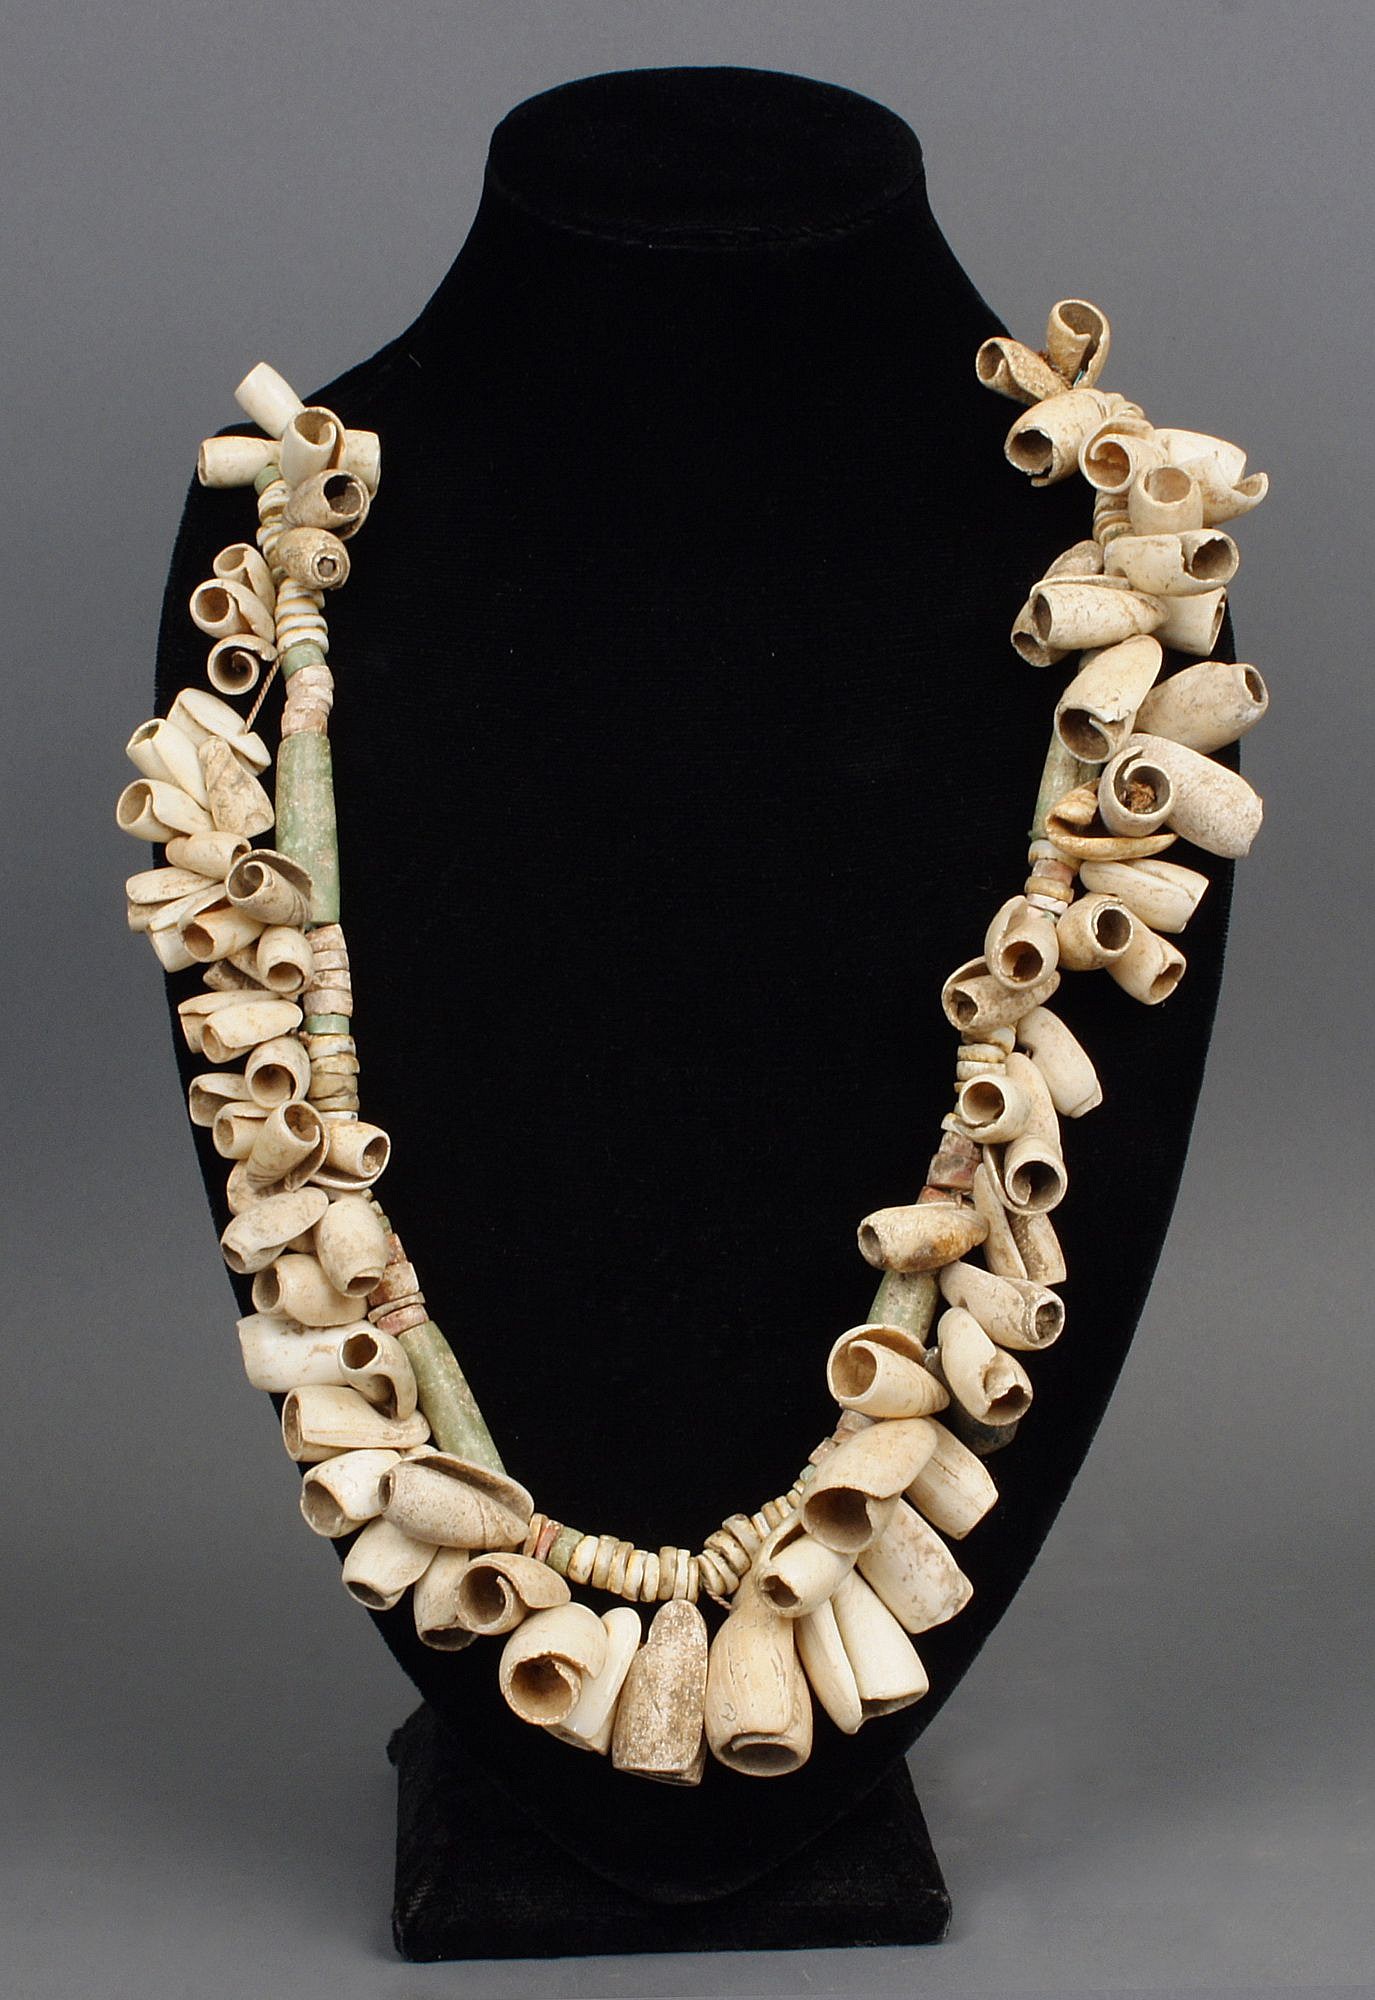 Dominican Republic, Taino Necklace Composed of Operla Snail Shells
These cone snail (gastropoda Conidae) shells were by the ancient Taino as beads and would have been worn on necklaces by people of high wealth and status.  The beads are ancient, but this necklace is modern assembled, with a design that resembles an ancient necklace.
Media: Shell
Dimensions: Length: 21"
$3,200
99376